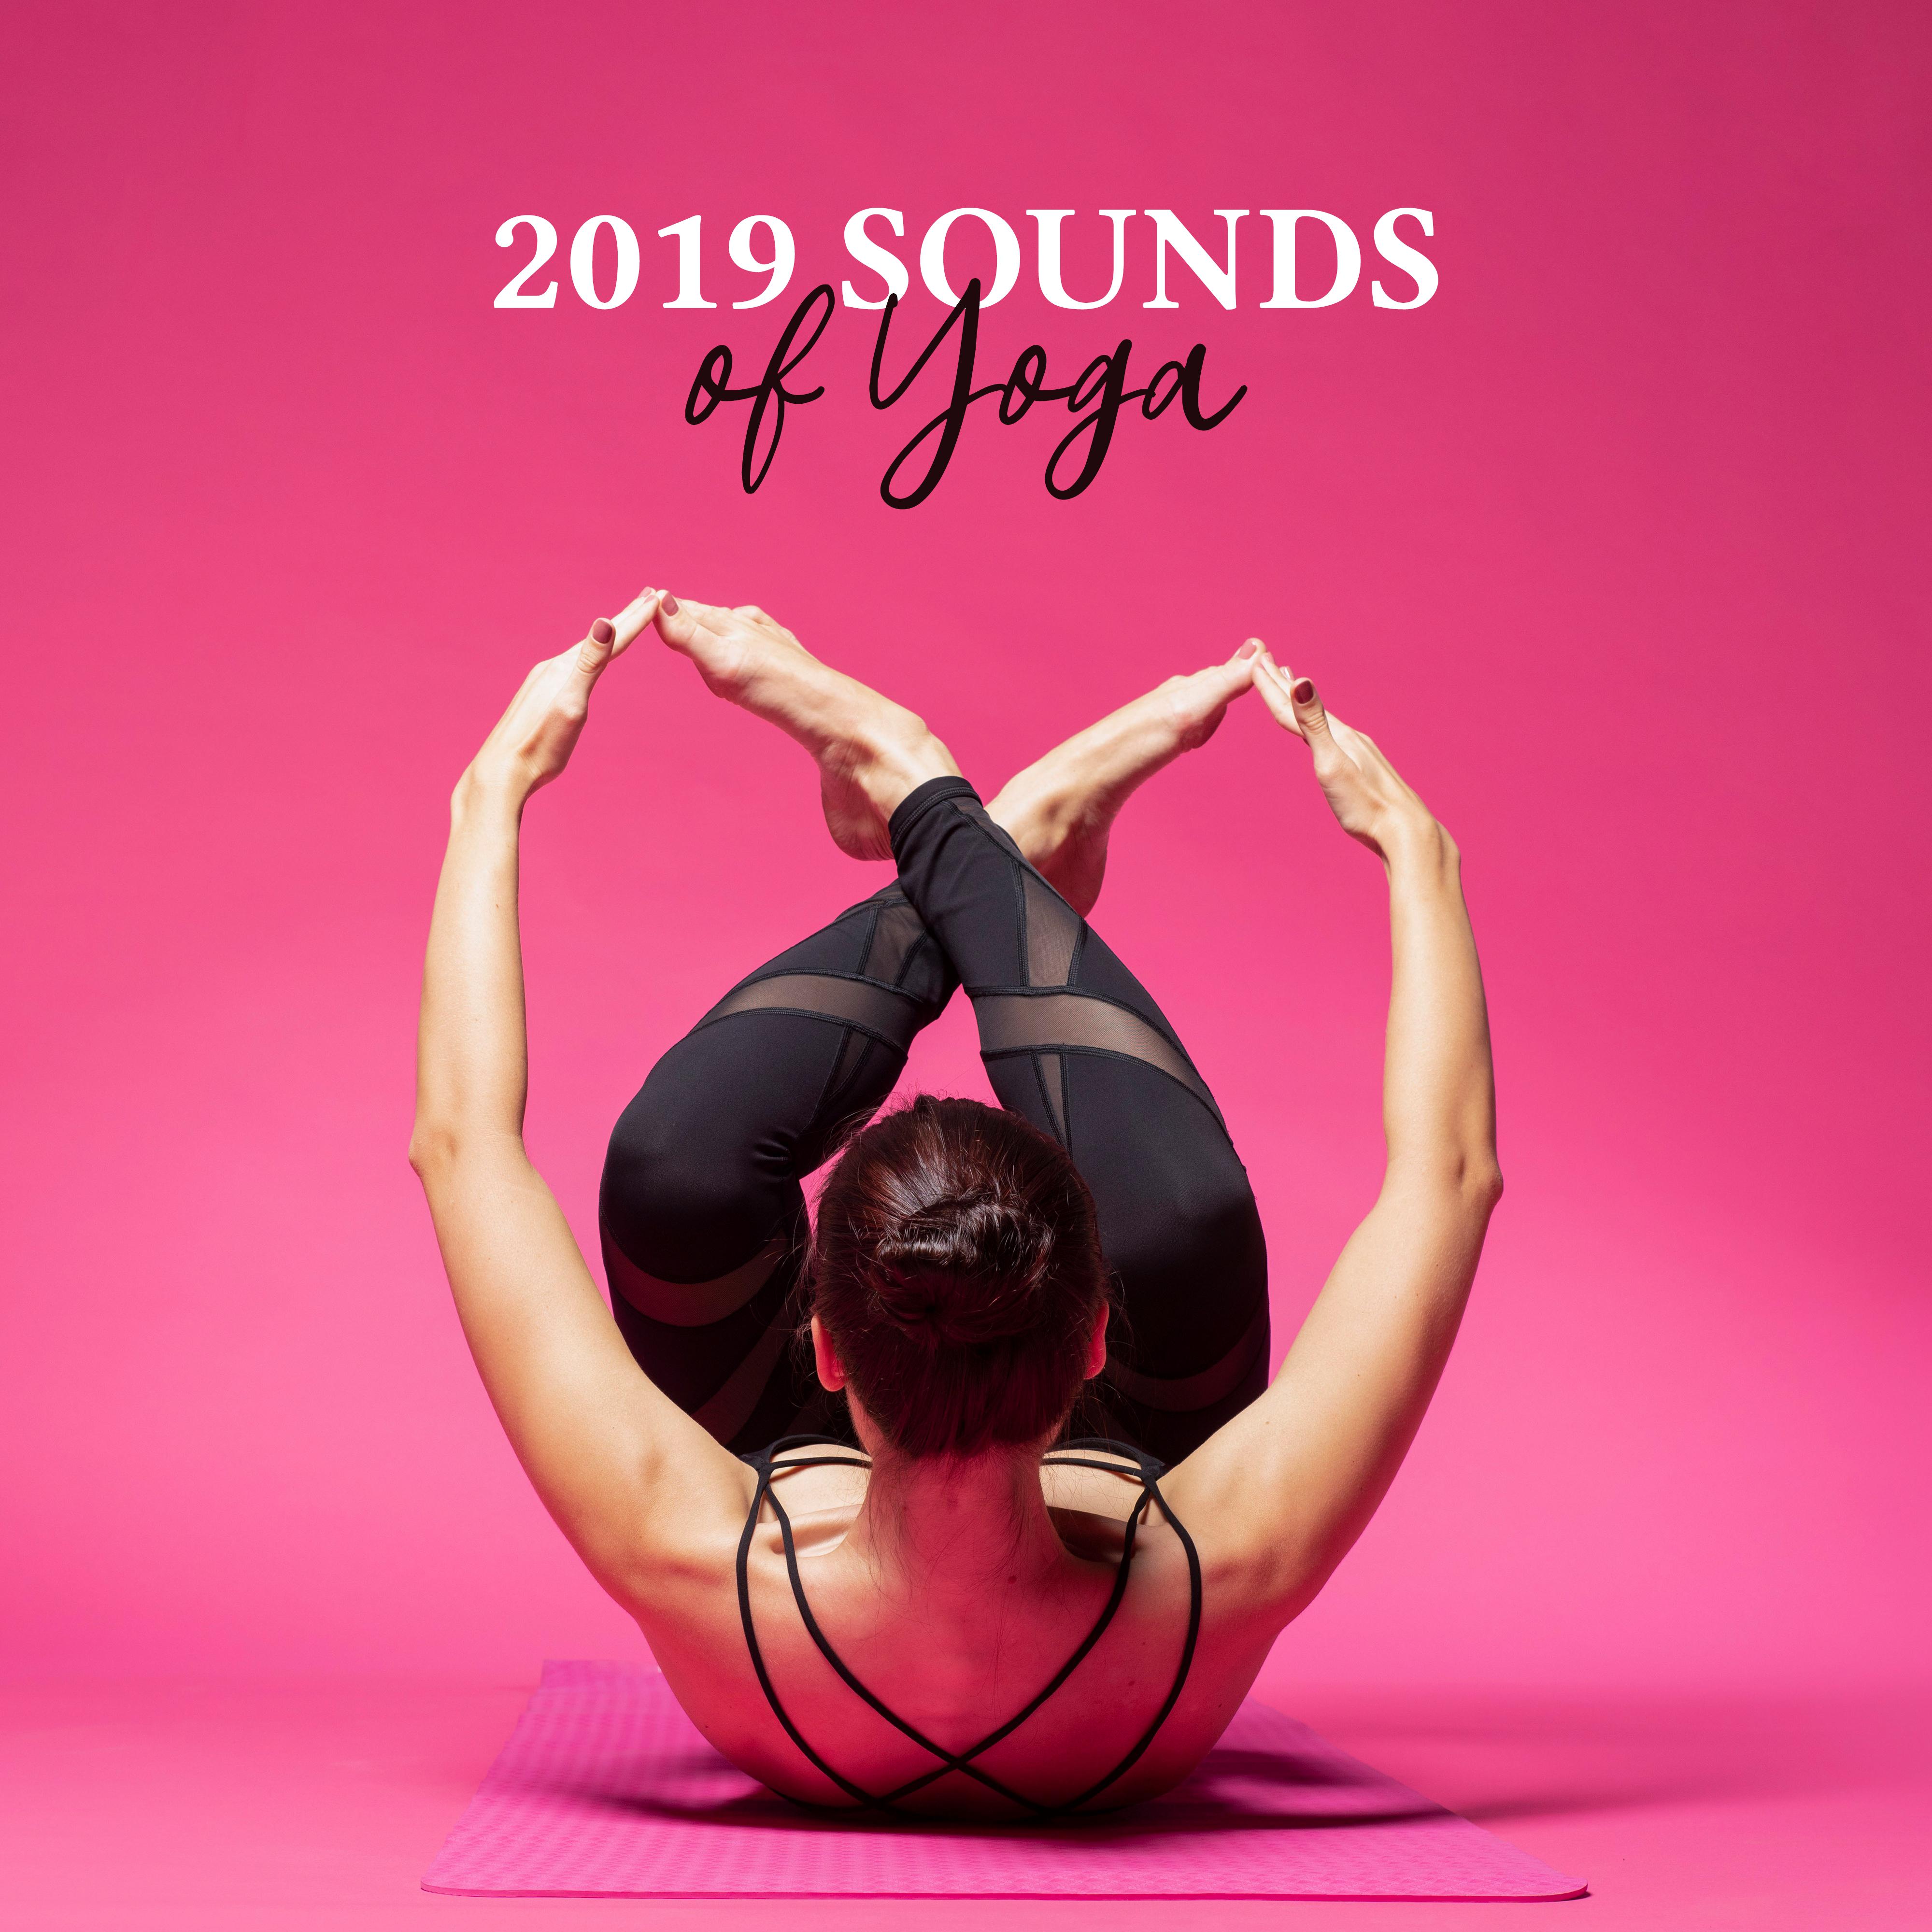 2019 Sounds of Yoga: 15 New Age Tracks for Meditation & Deep Relaxation, Music for Body & Soul, Chakra Healing